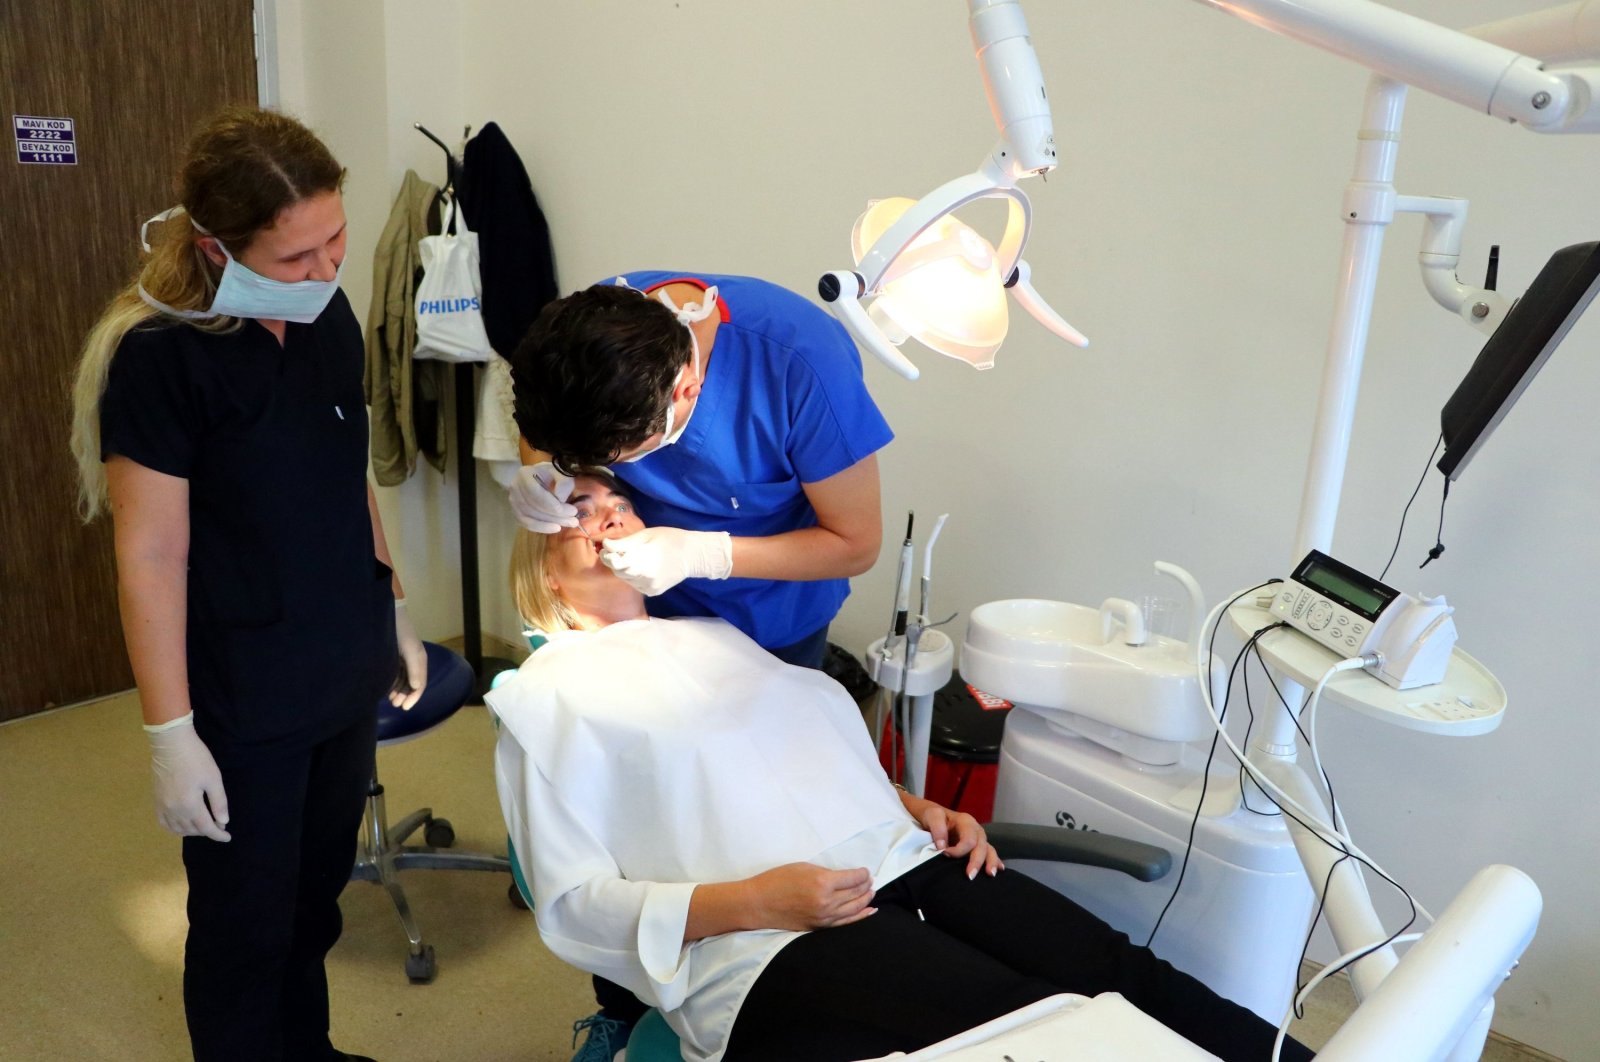 A public dental hospital near Turkey's borders with Bulgaria and Greece, has evolved into a popular destination for patients from the Balkan countries since it opened in 2015, northwestern Tekirdağ, Turkey, April 10, 2019. (AA Photo)